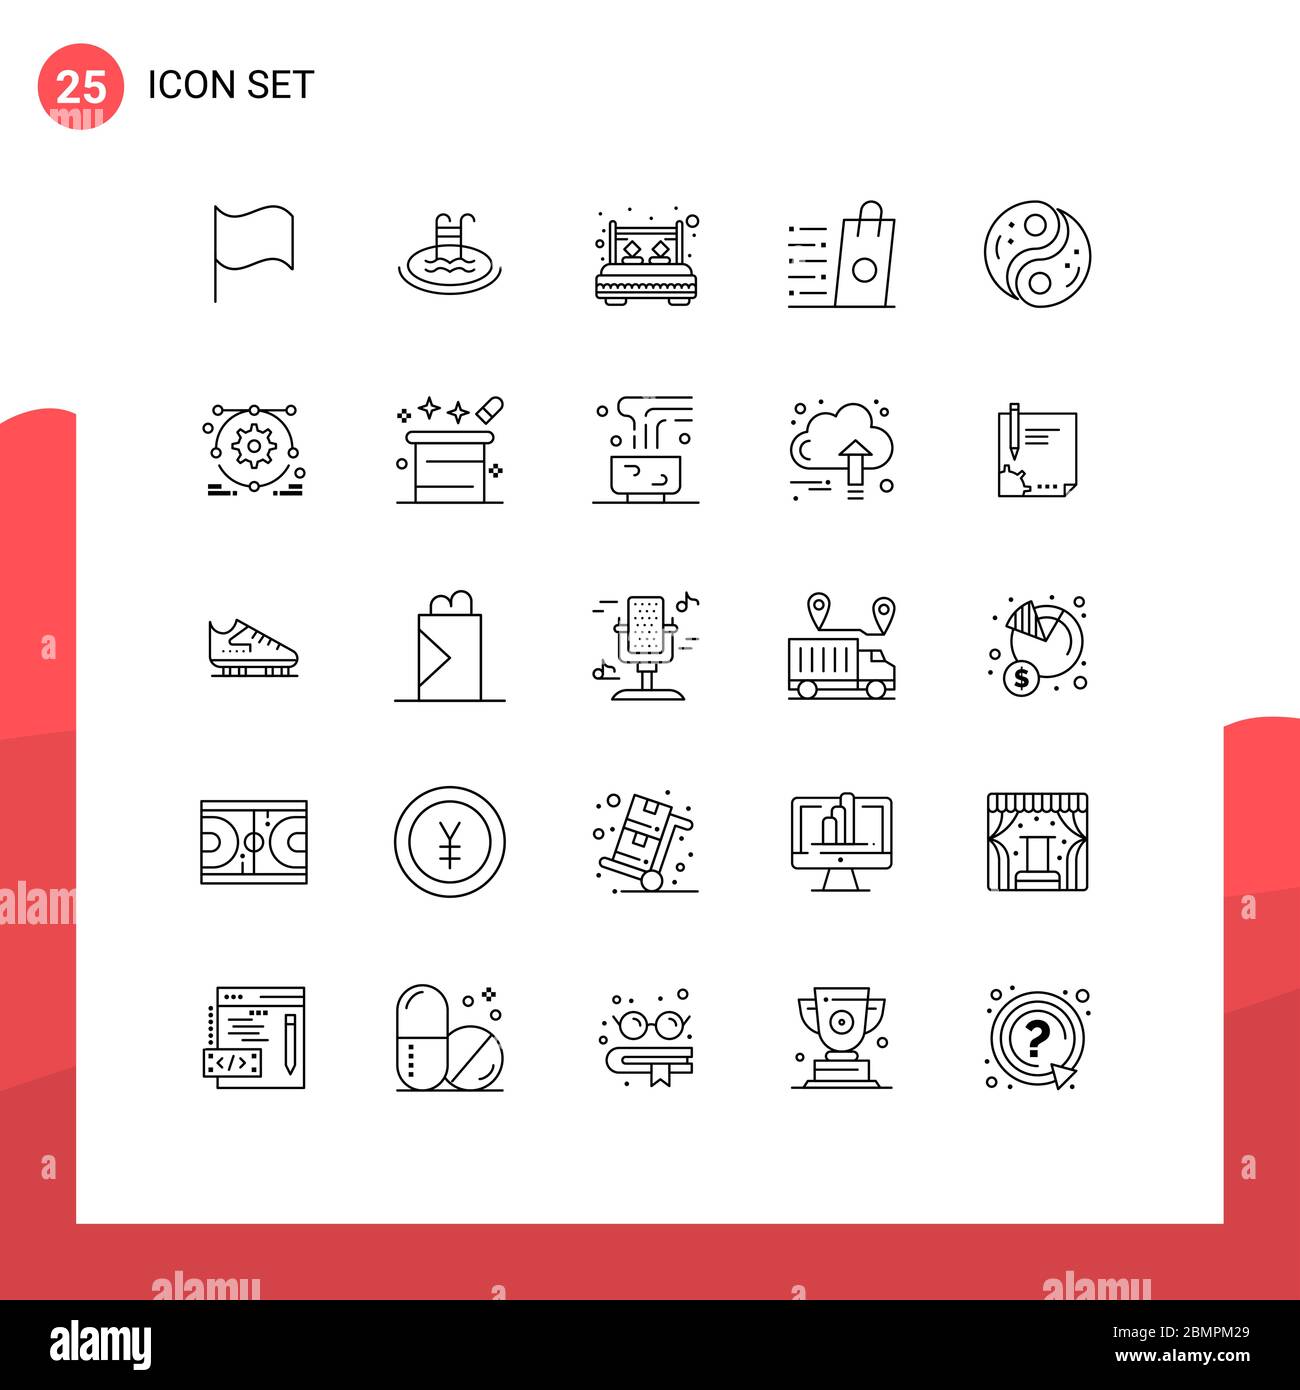 Mobile Interface Line Set of 25 Pictograms of polarity, shop, bedroom, sell, bag Editable Vector Design Elements Stock Vector